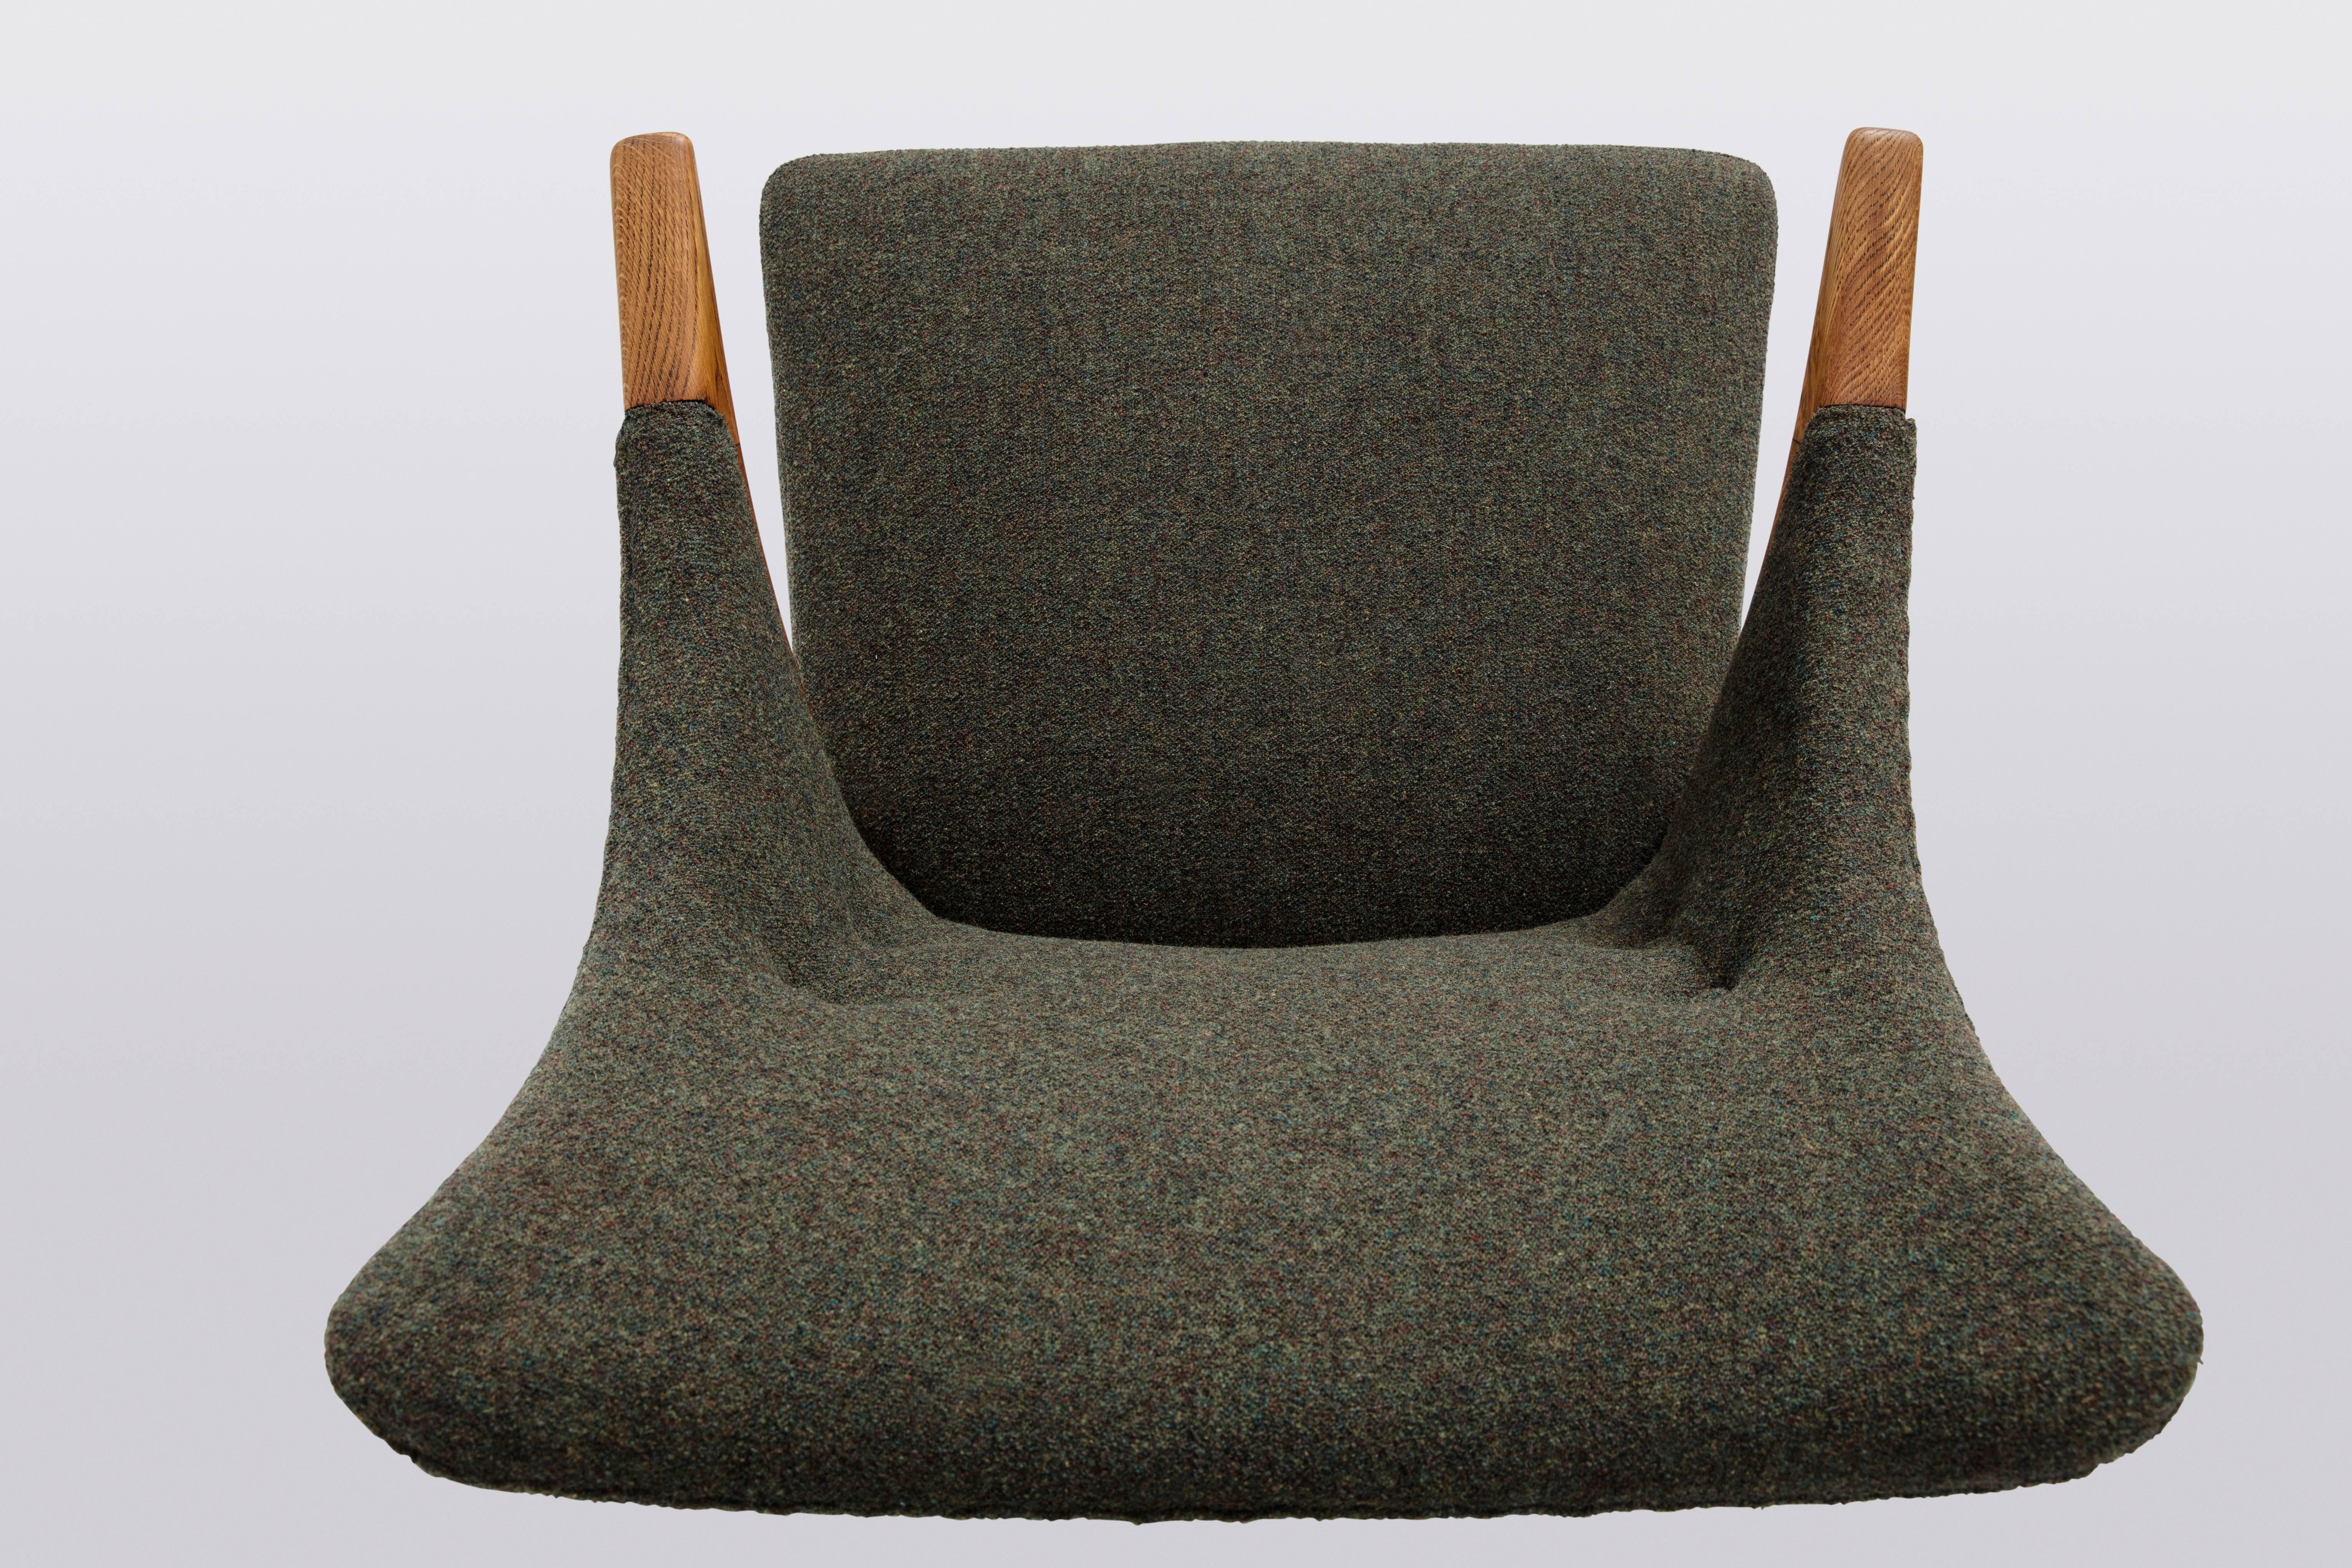 Produced by Skipper Furniture
Exposed paws and legs of solid oak
Grey wool upholstery by Kvadrat.